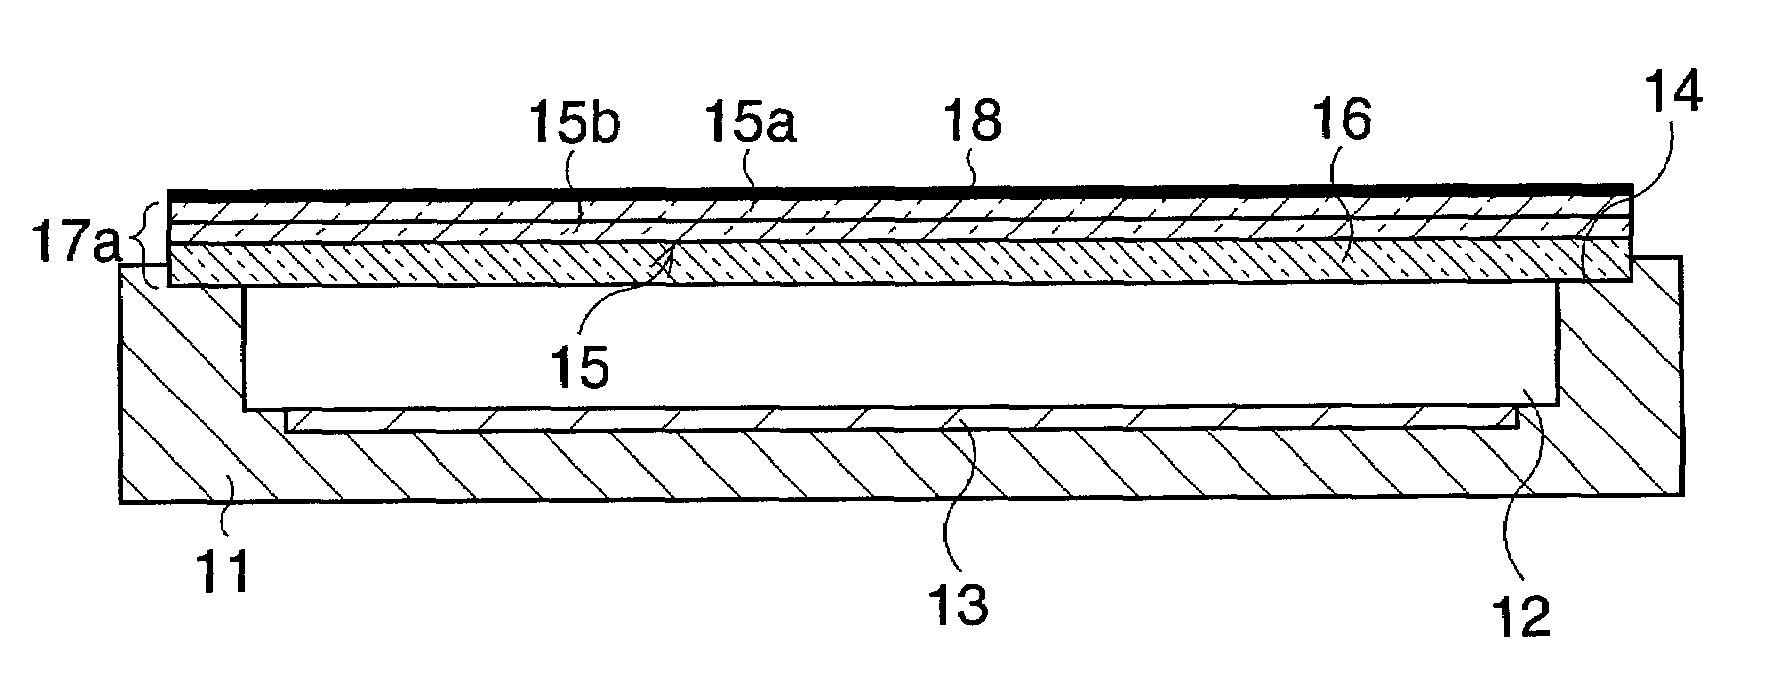 Image pickup device and cover plate with conductive film layer